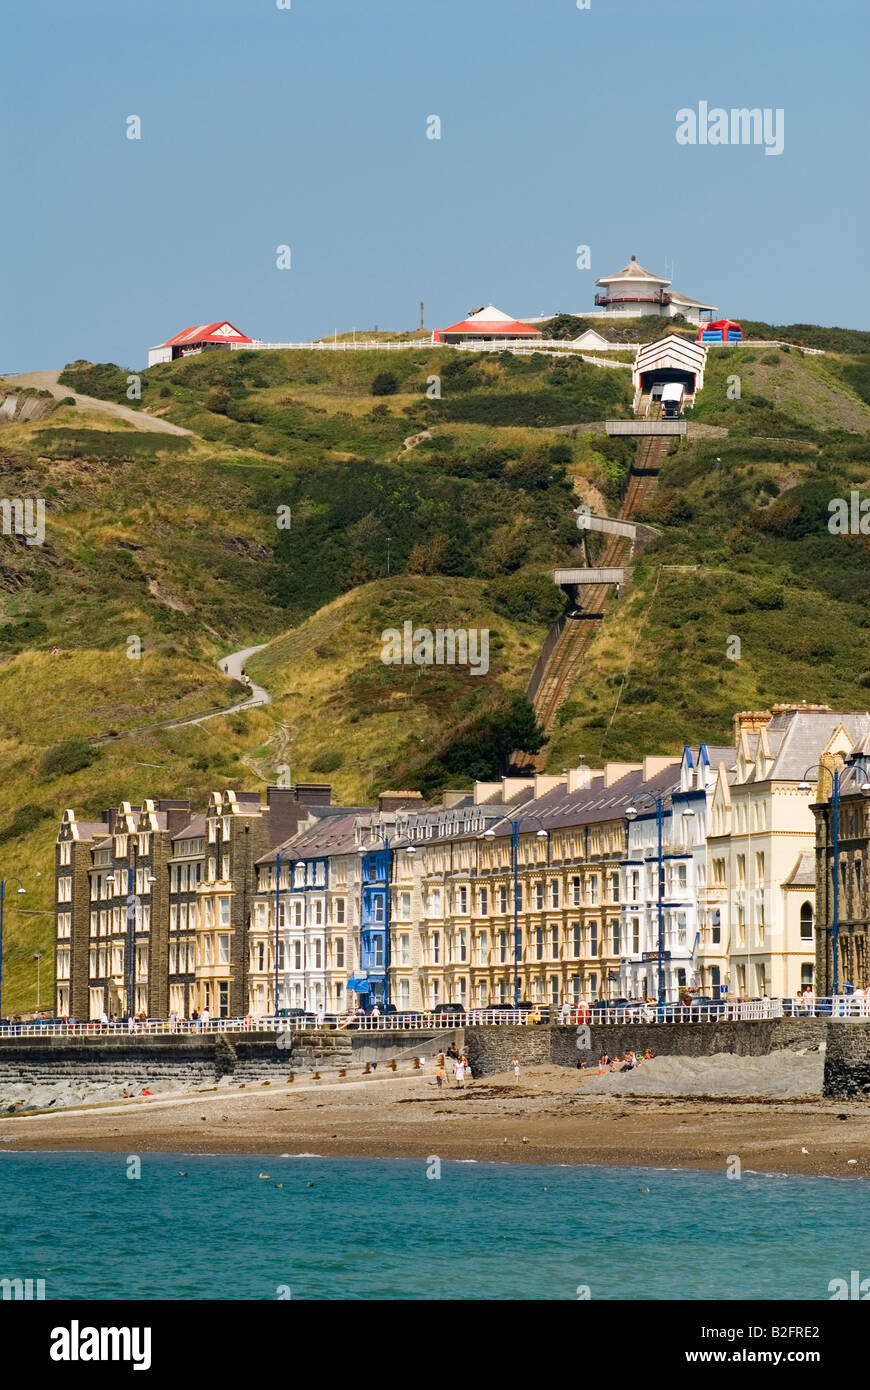 Aberystwyth Ceredigion west coast mid Wales UK 2008.  Cliff electric railway 'Constitution Hill' 2000s HOMER SYKES Stock Photo